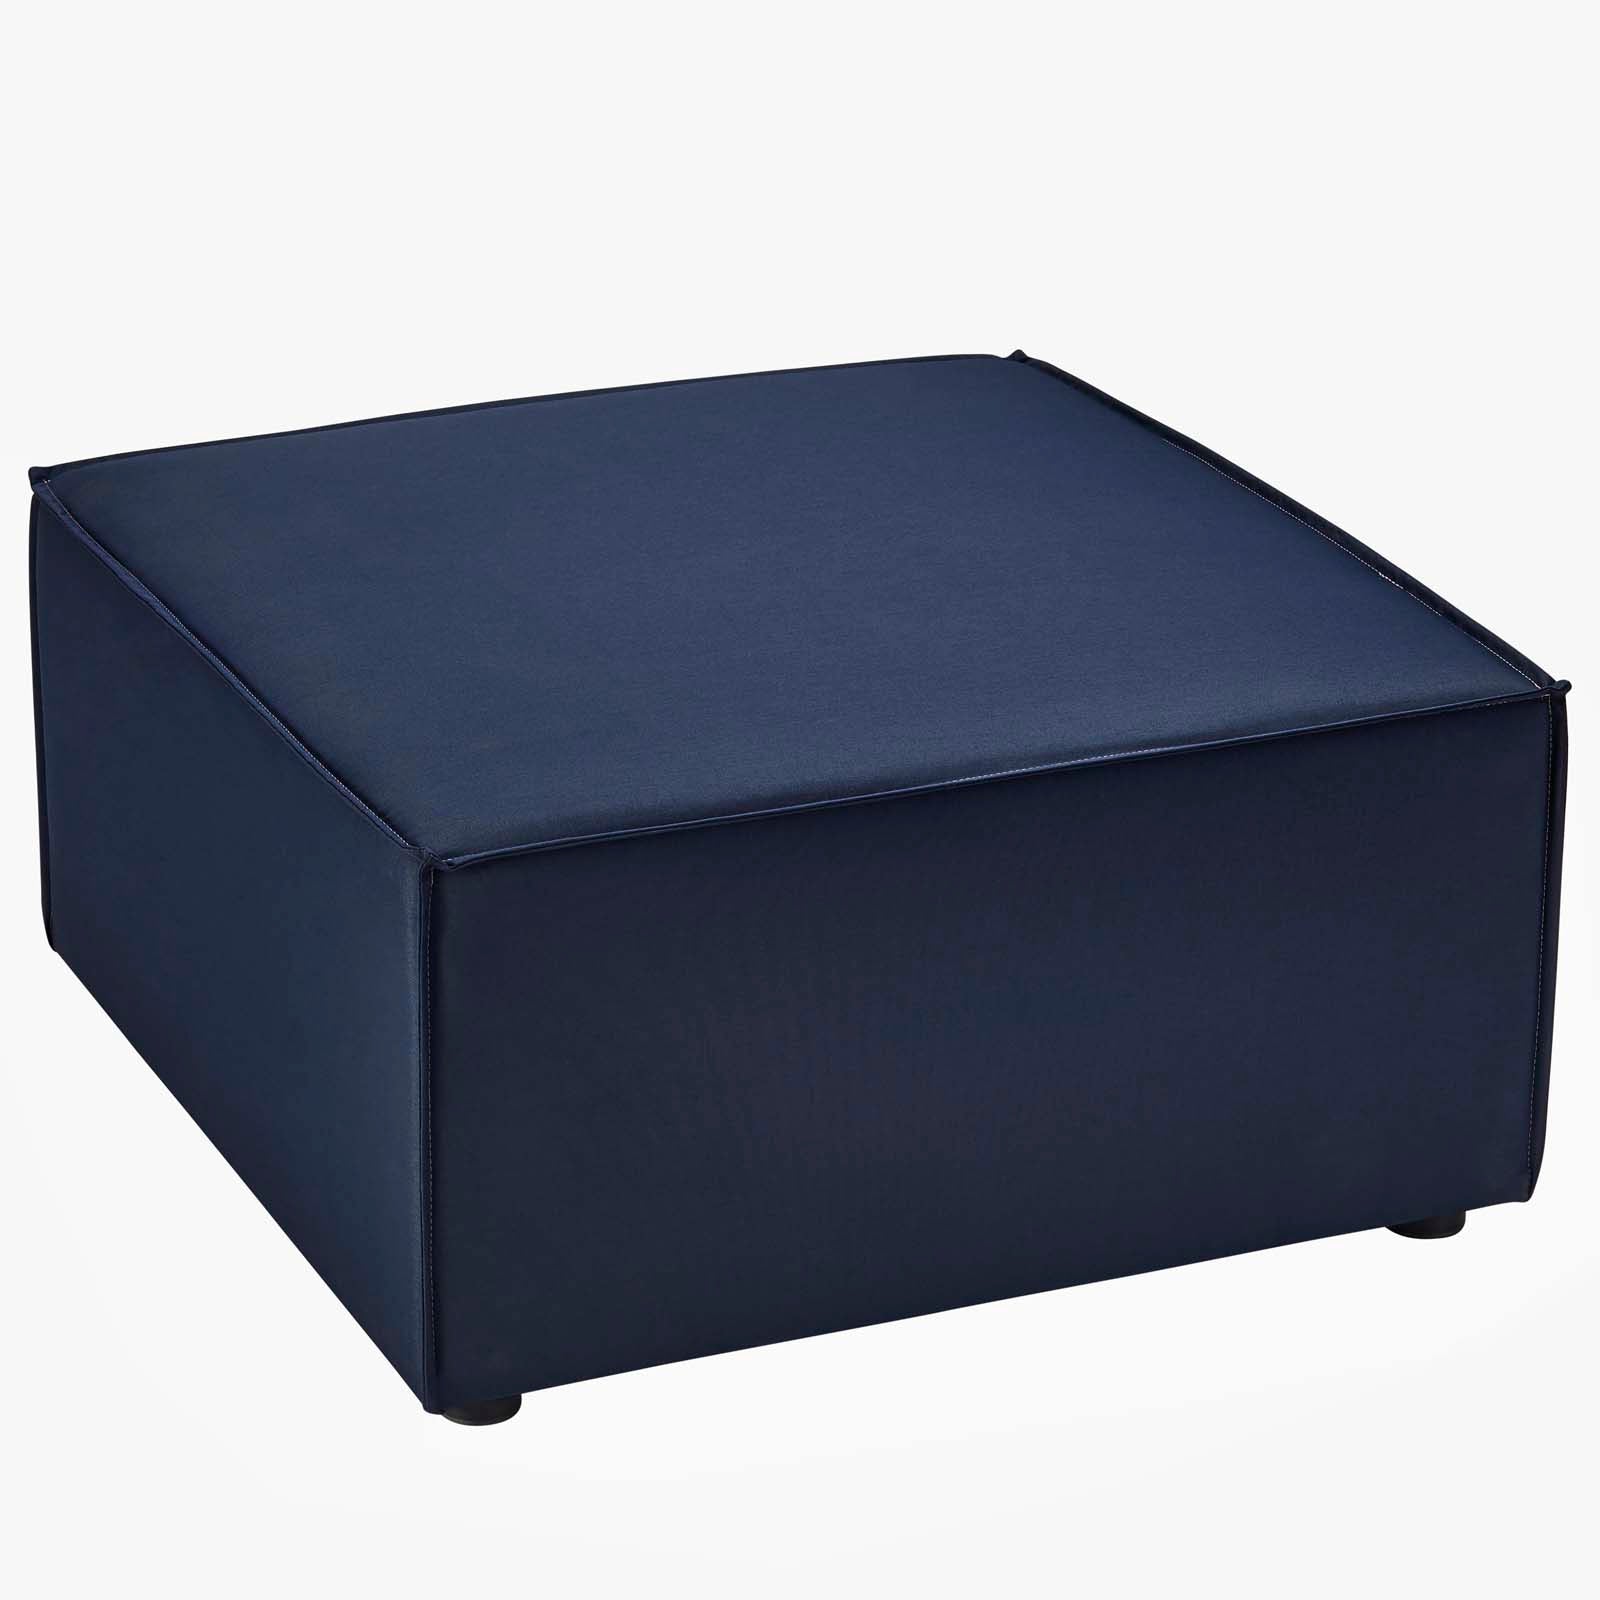 Saybrook Outdoor Patio Upholstered Sectional Sofa Ottoman - East Shore Modern Home Furnishings